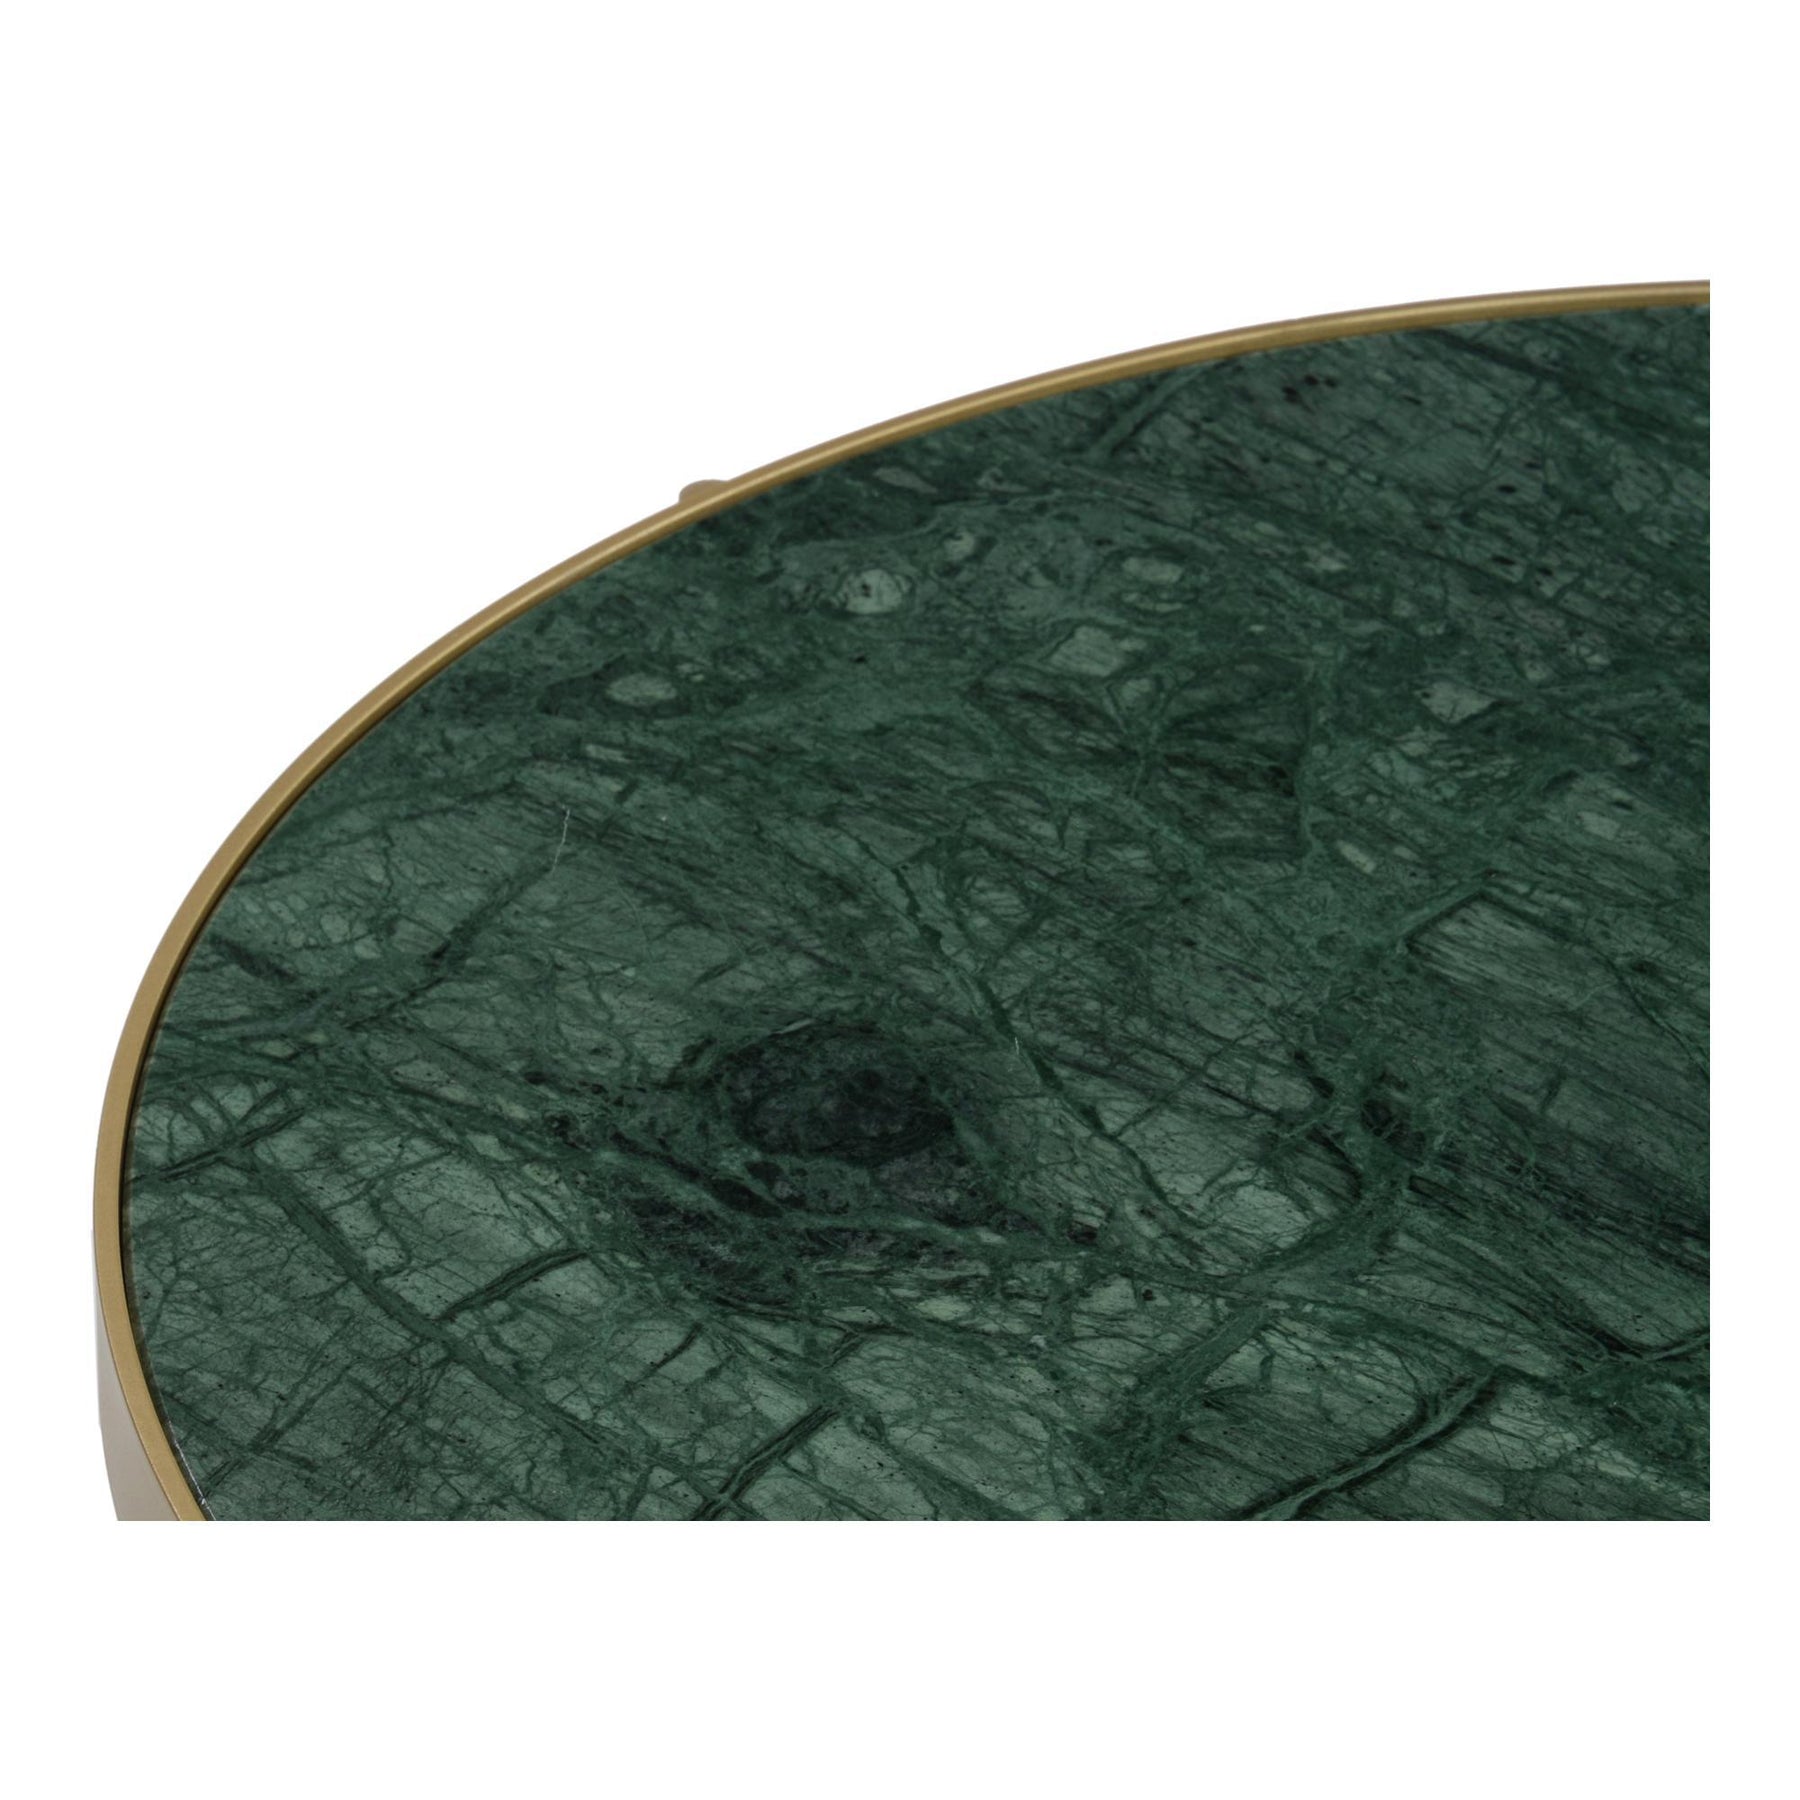 Moe's Home Collection Verde Marble Coffee Table - BZ-1090-16